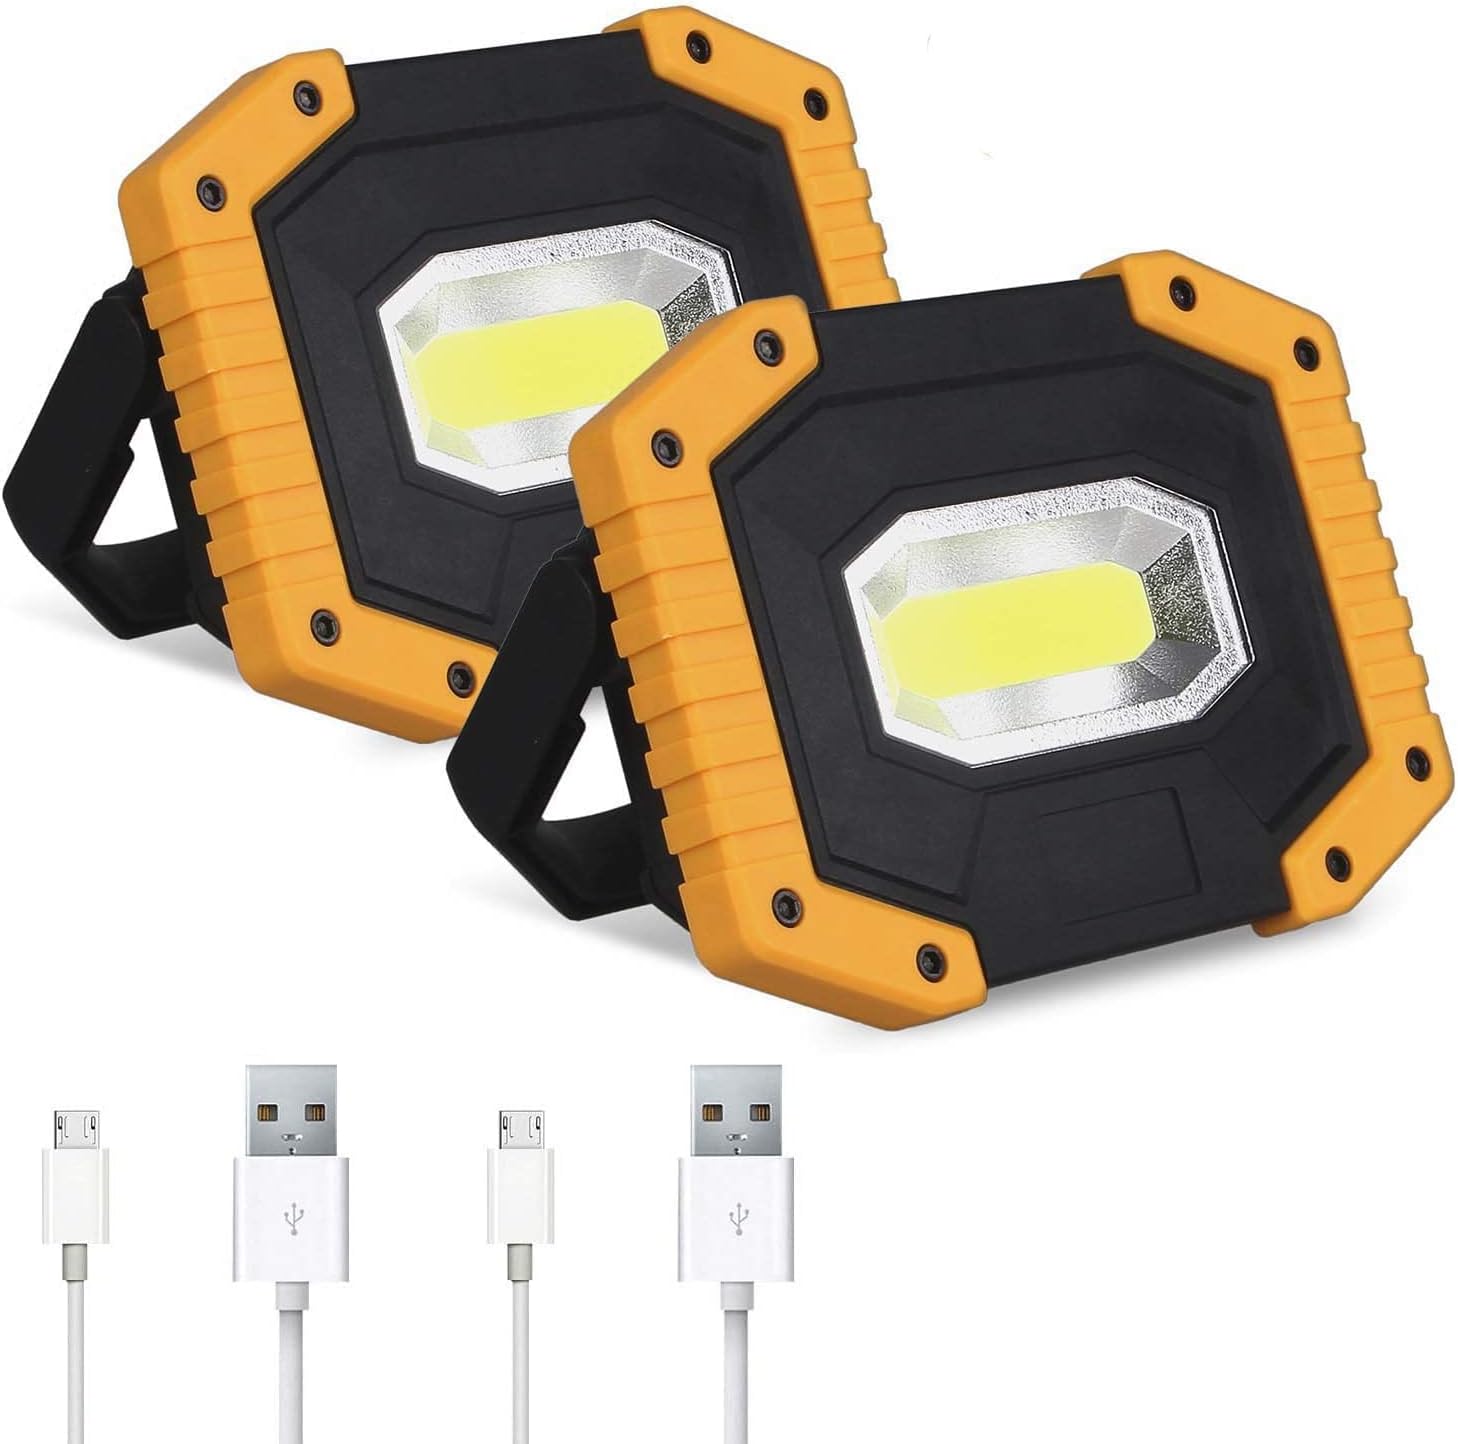 Rechargeable LED Work Light 2 Pack, COB 30W 2000LM [...]